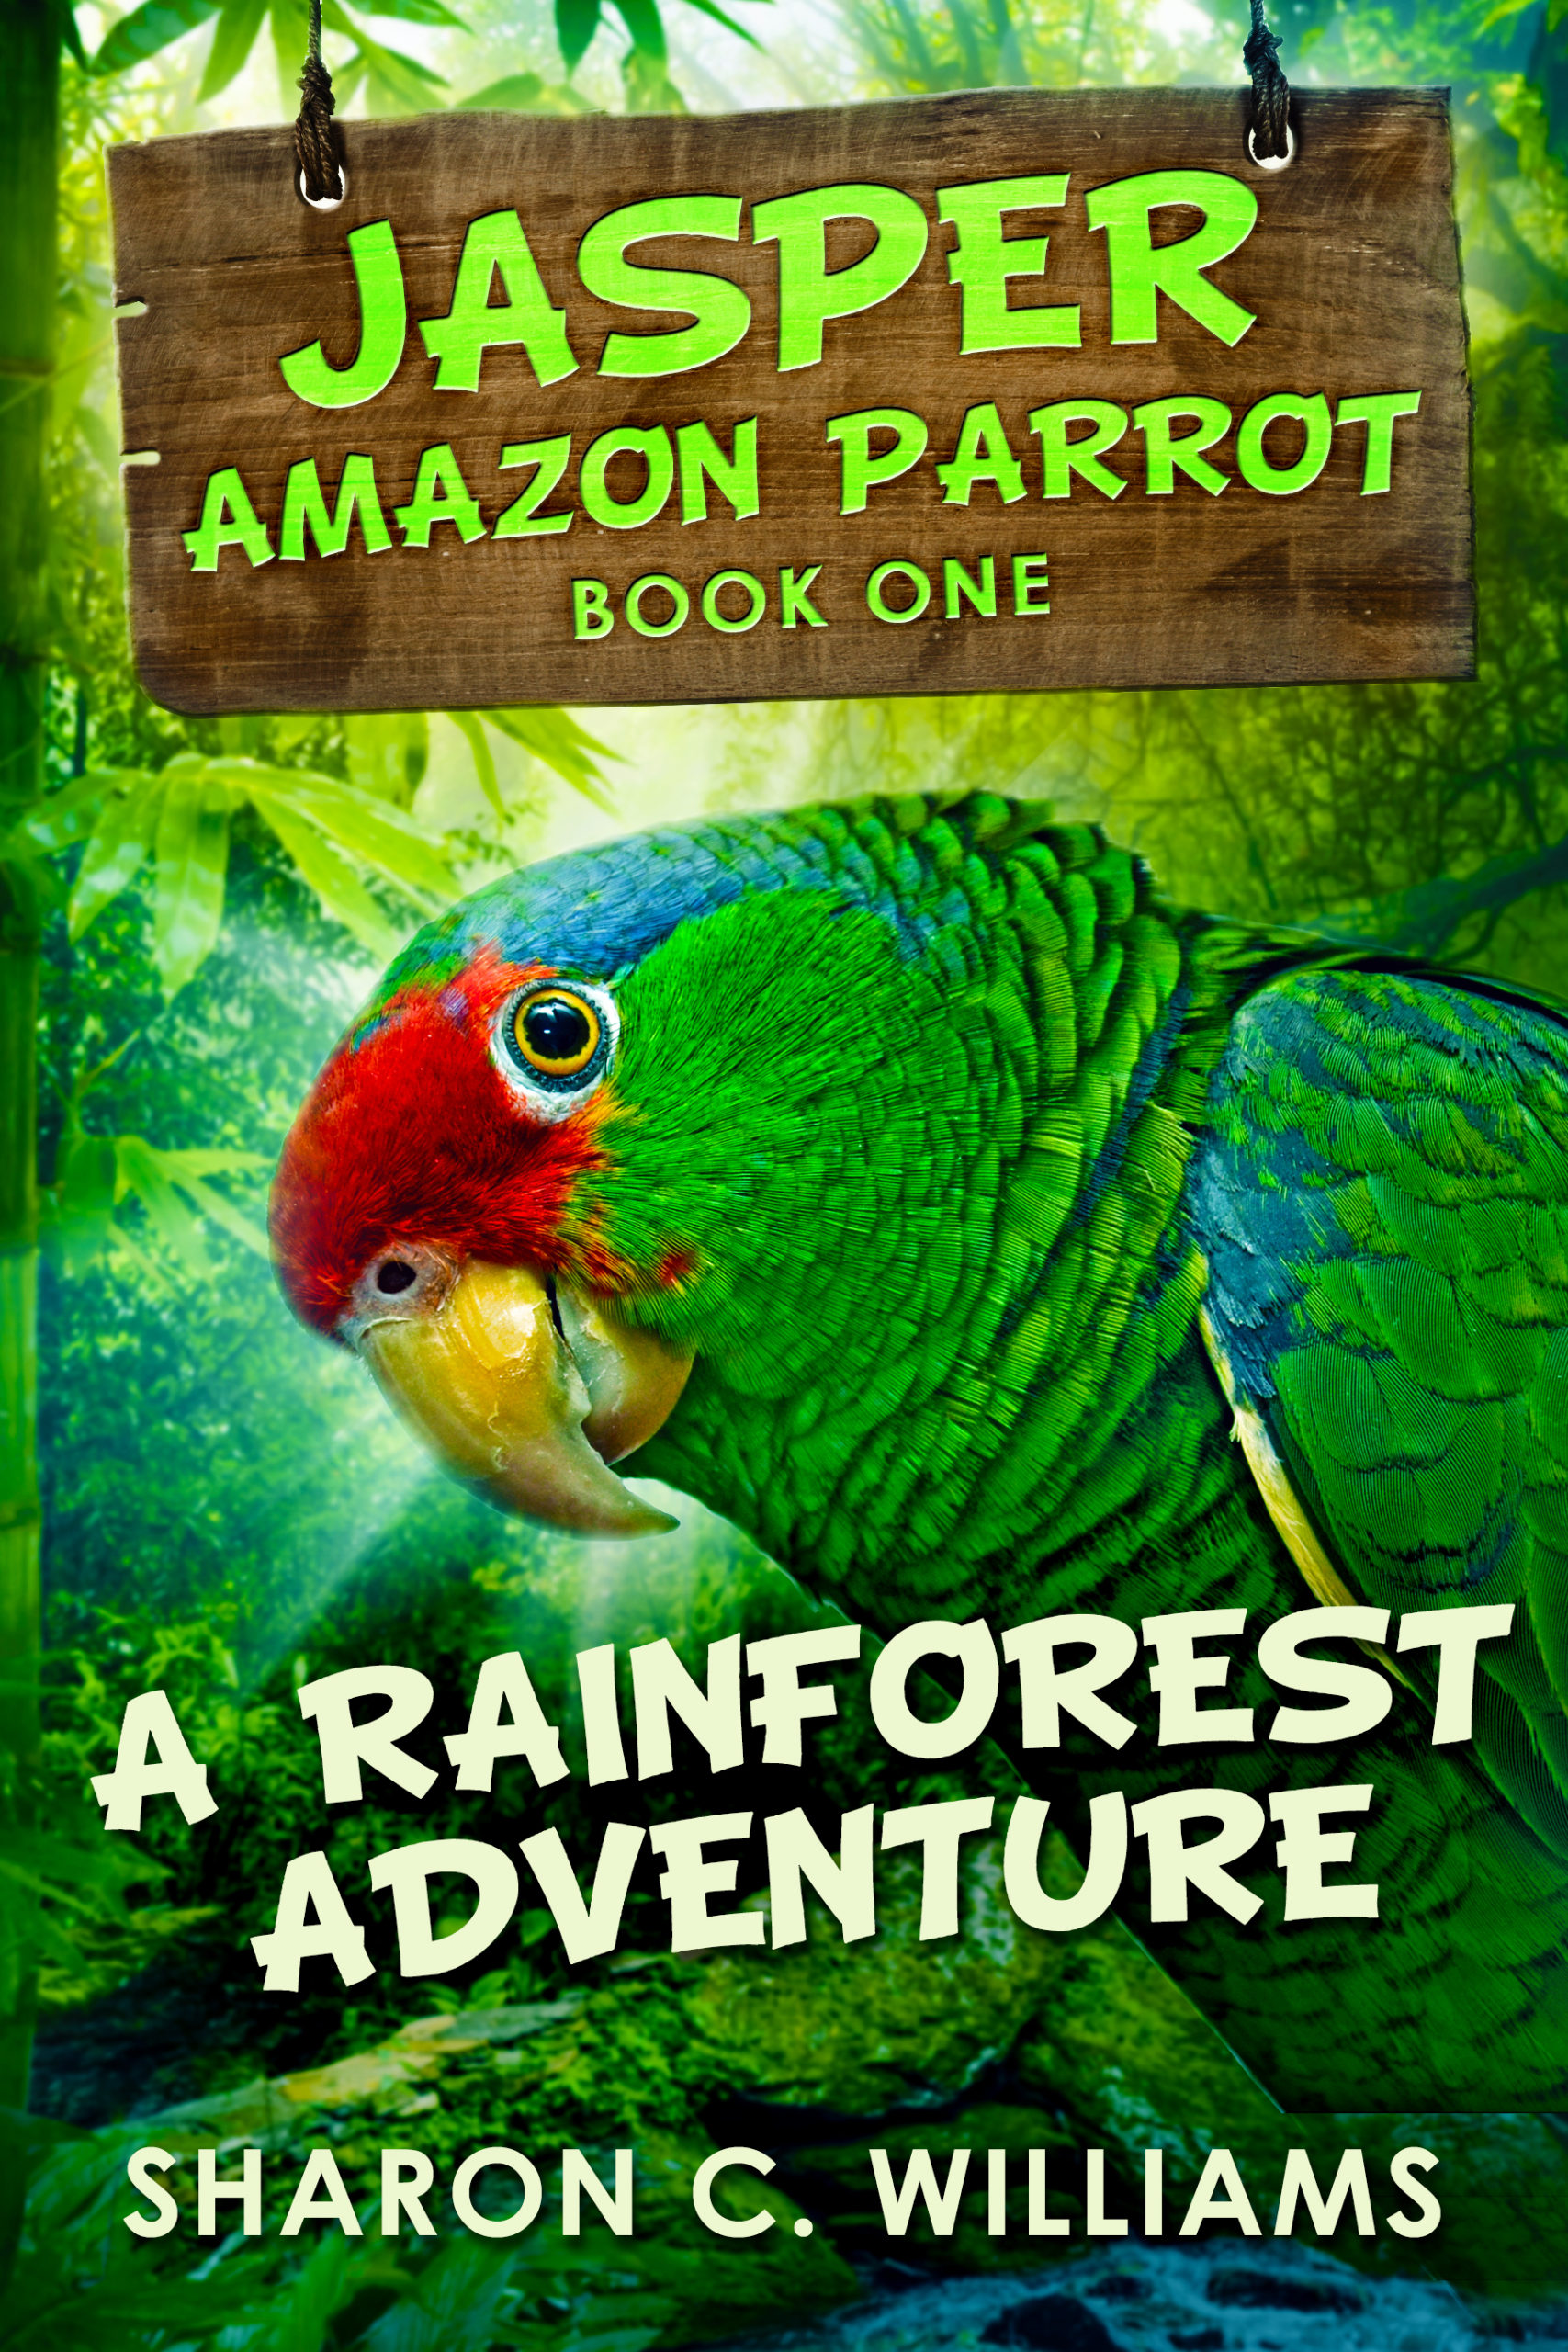 FREE: A Rainforest Adventure by Sharon C. Williams